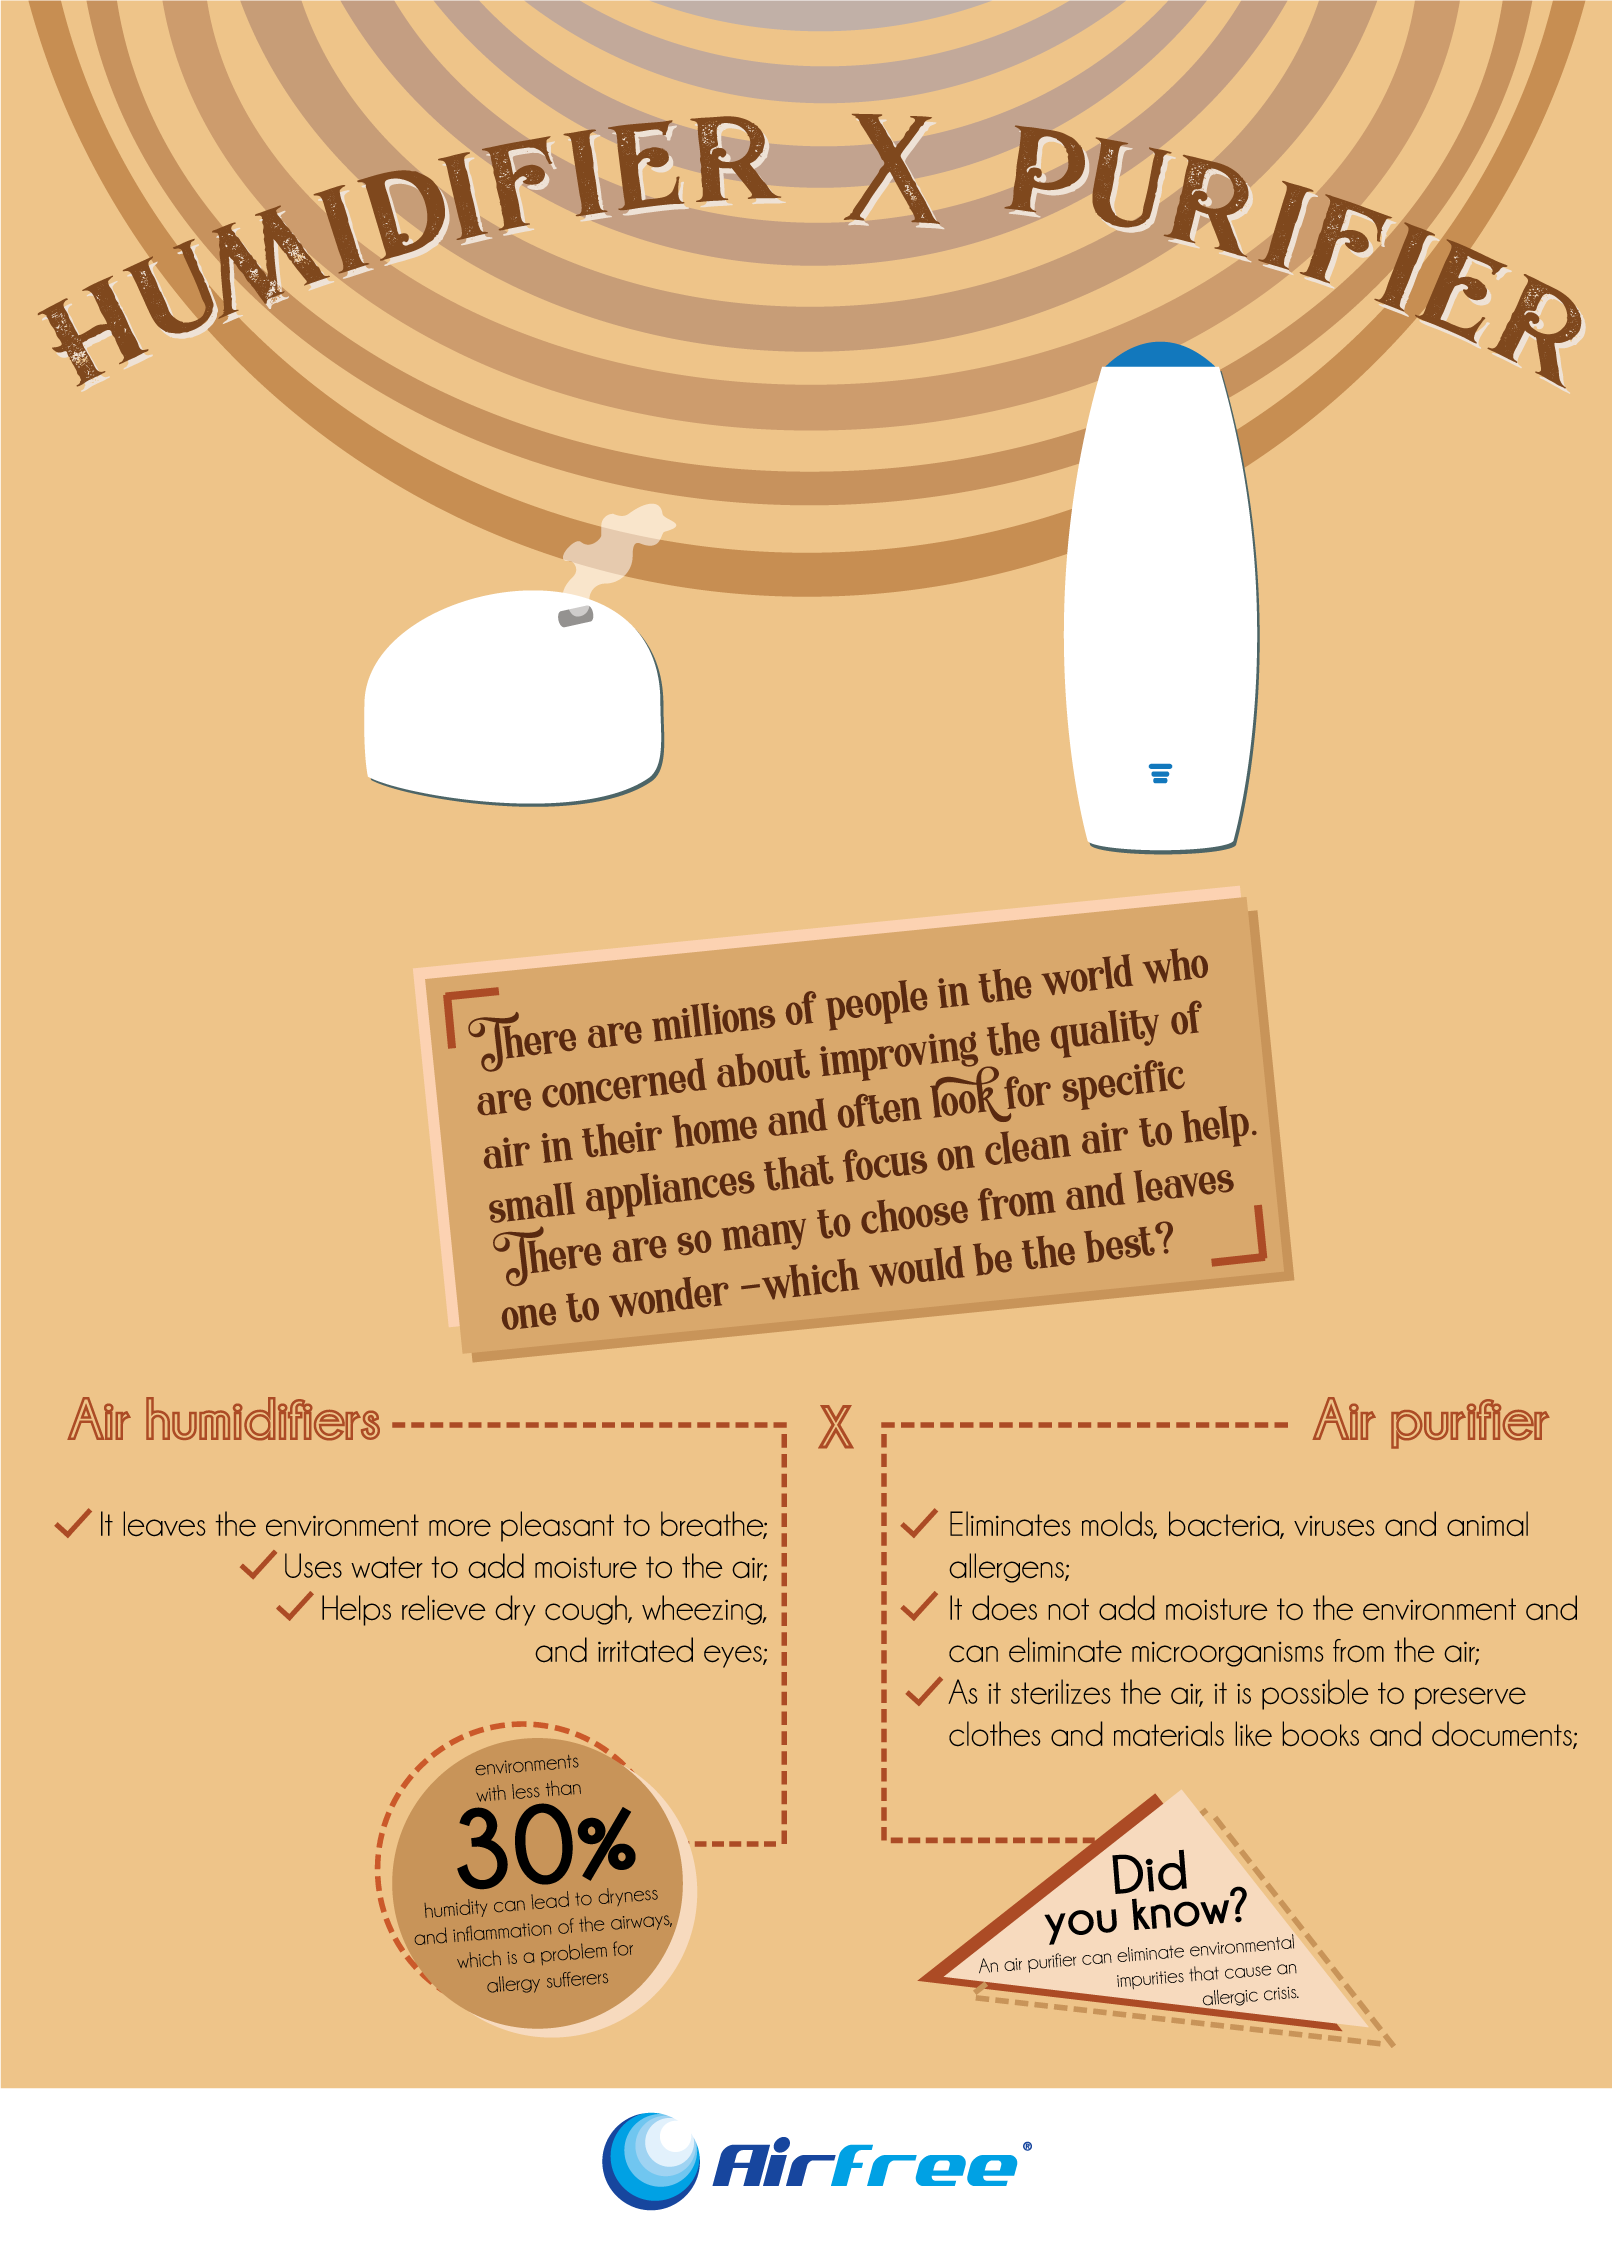 air quality - purifiers vs humidifiers